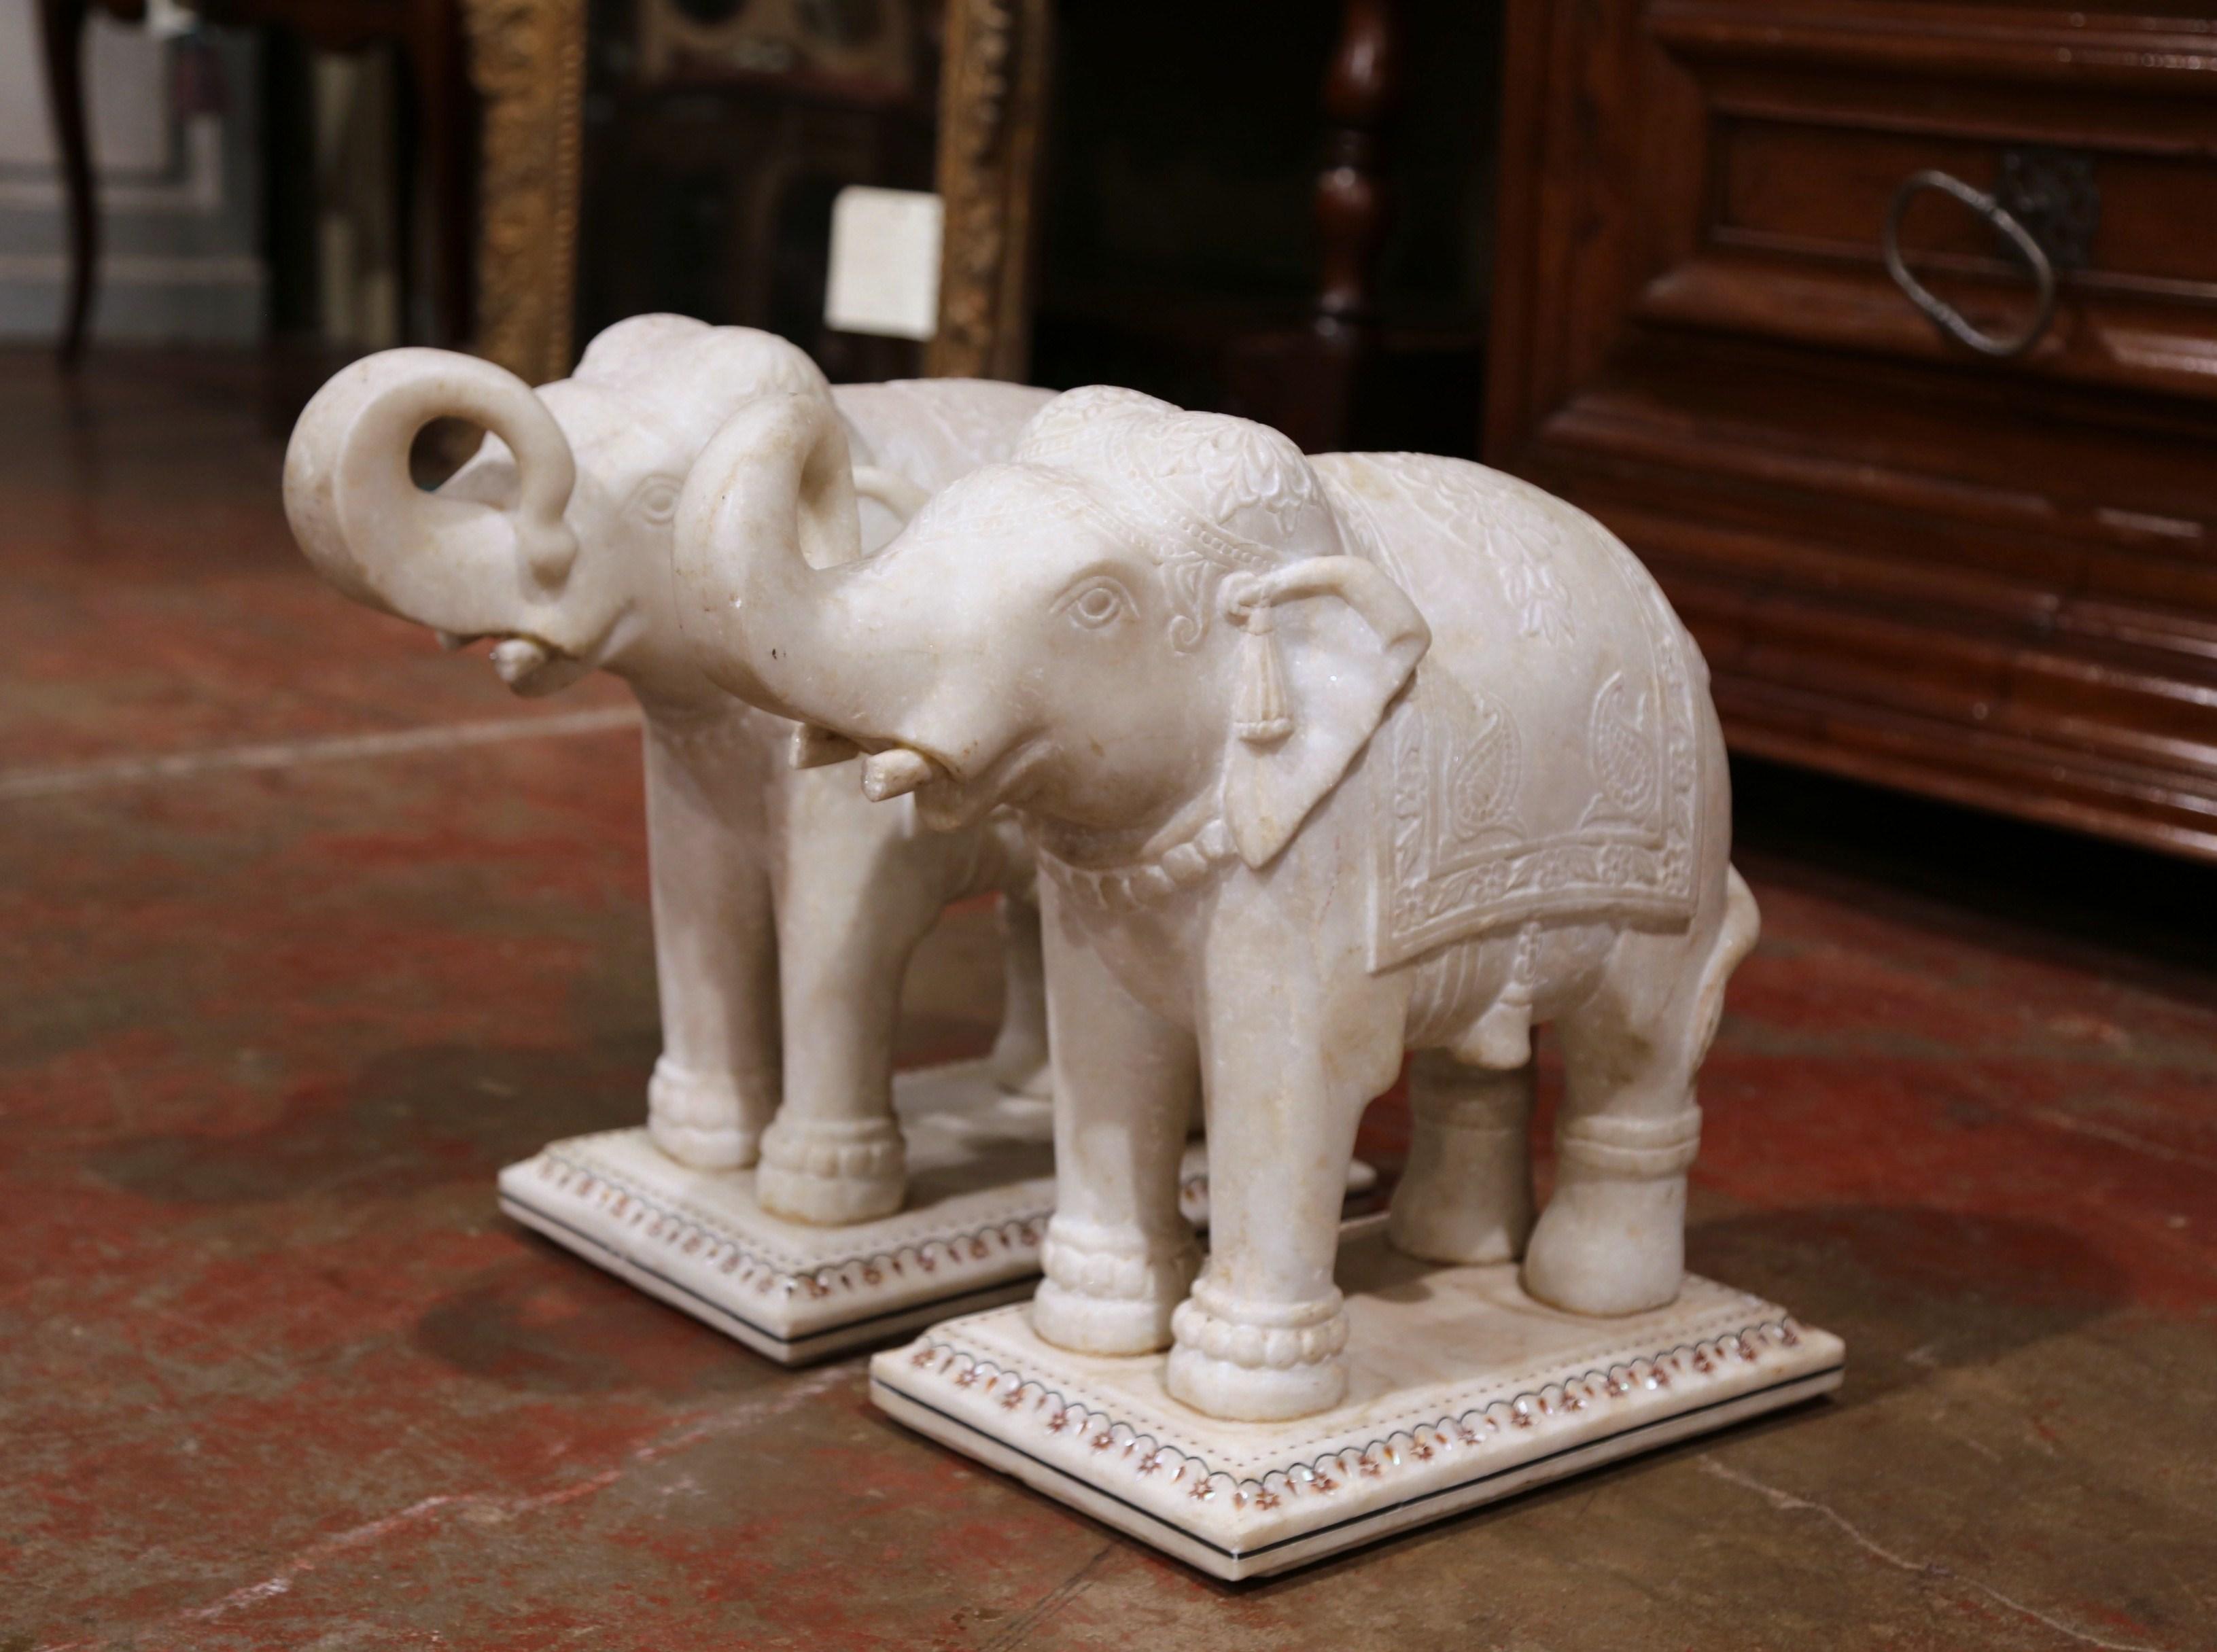 Make a statement in your entry with this pair of antique, marble elephant sculptures. Crafted in England circa 1860, the hand carved mammals stand on a rectangular base embellished with inlaid mother of pearl decor around the edges. Each elephant is